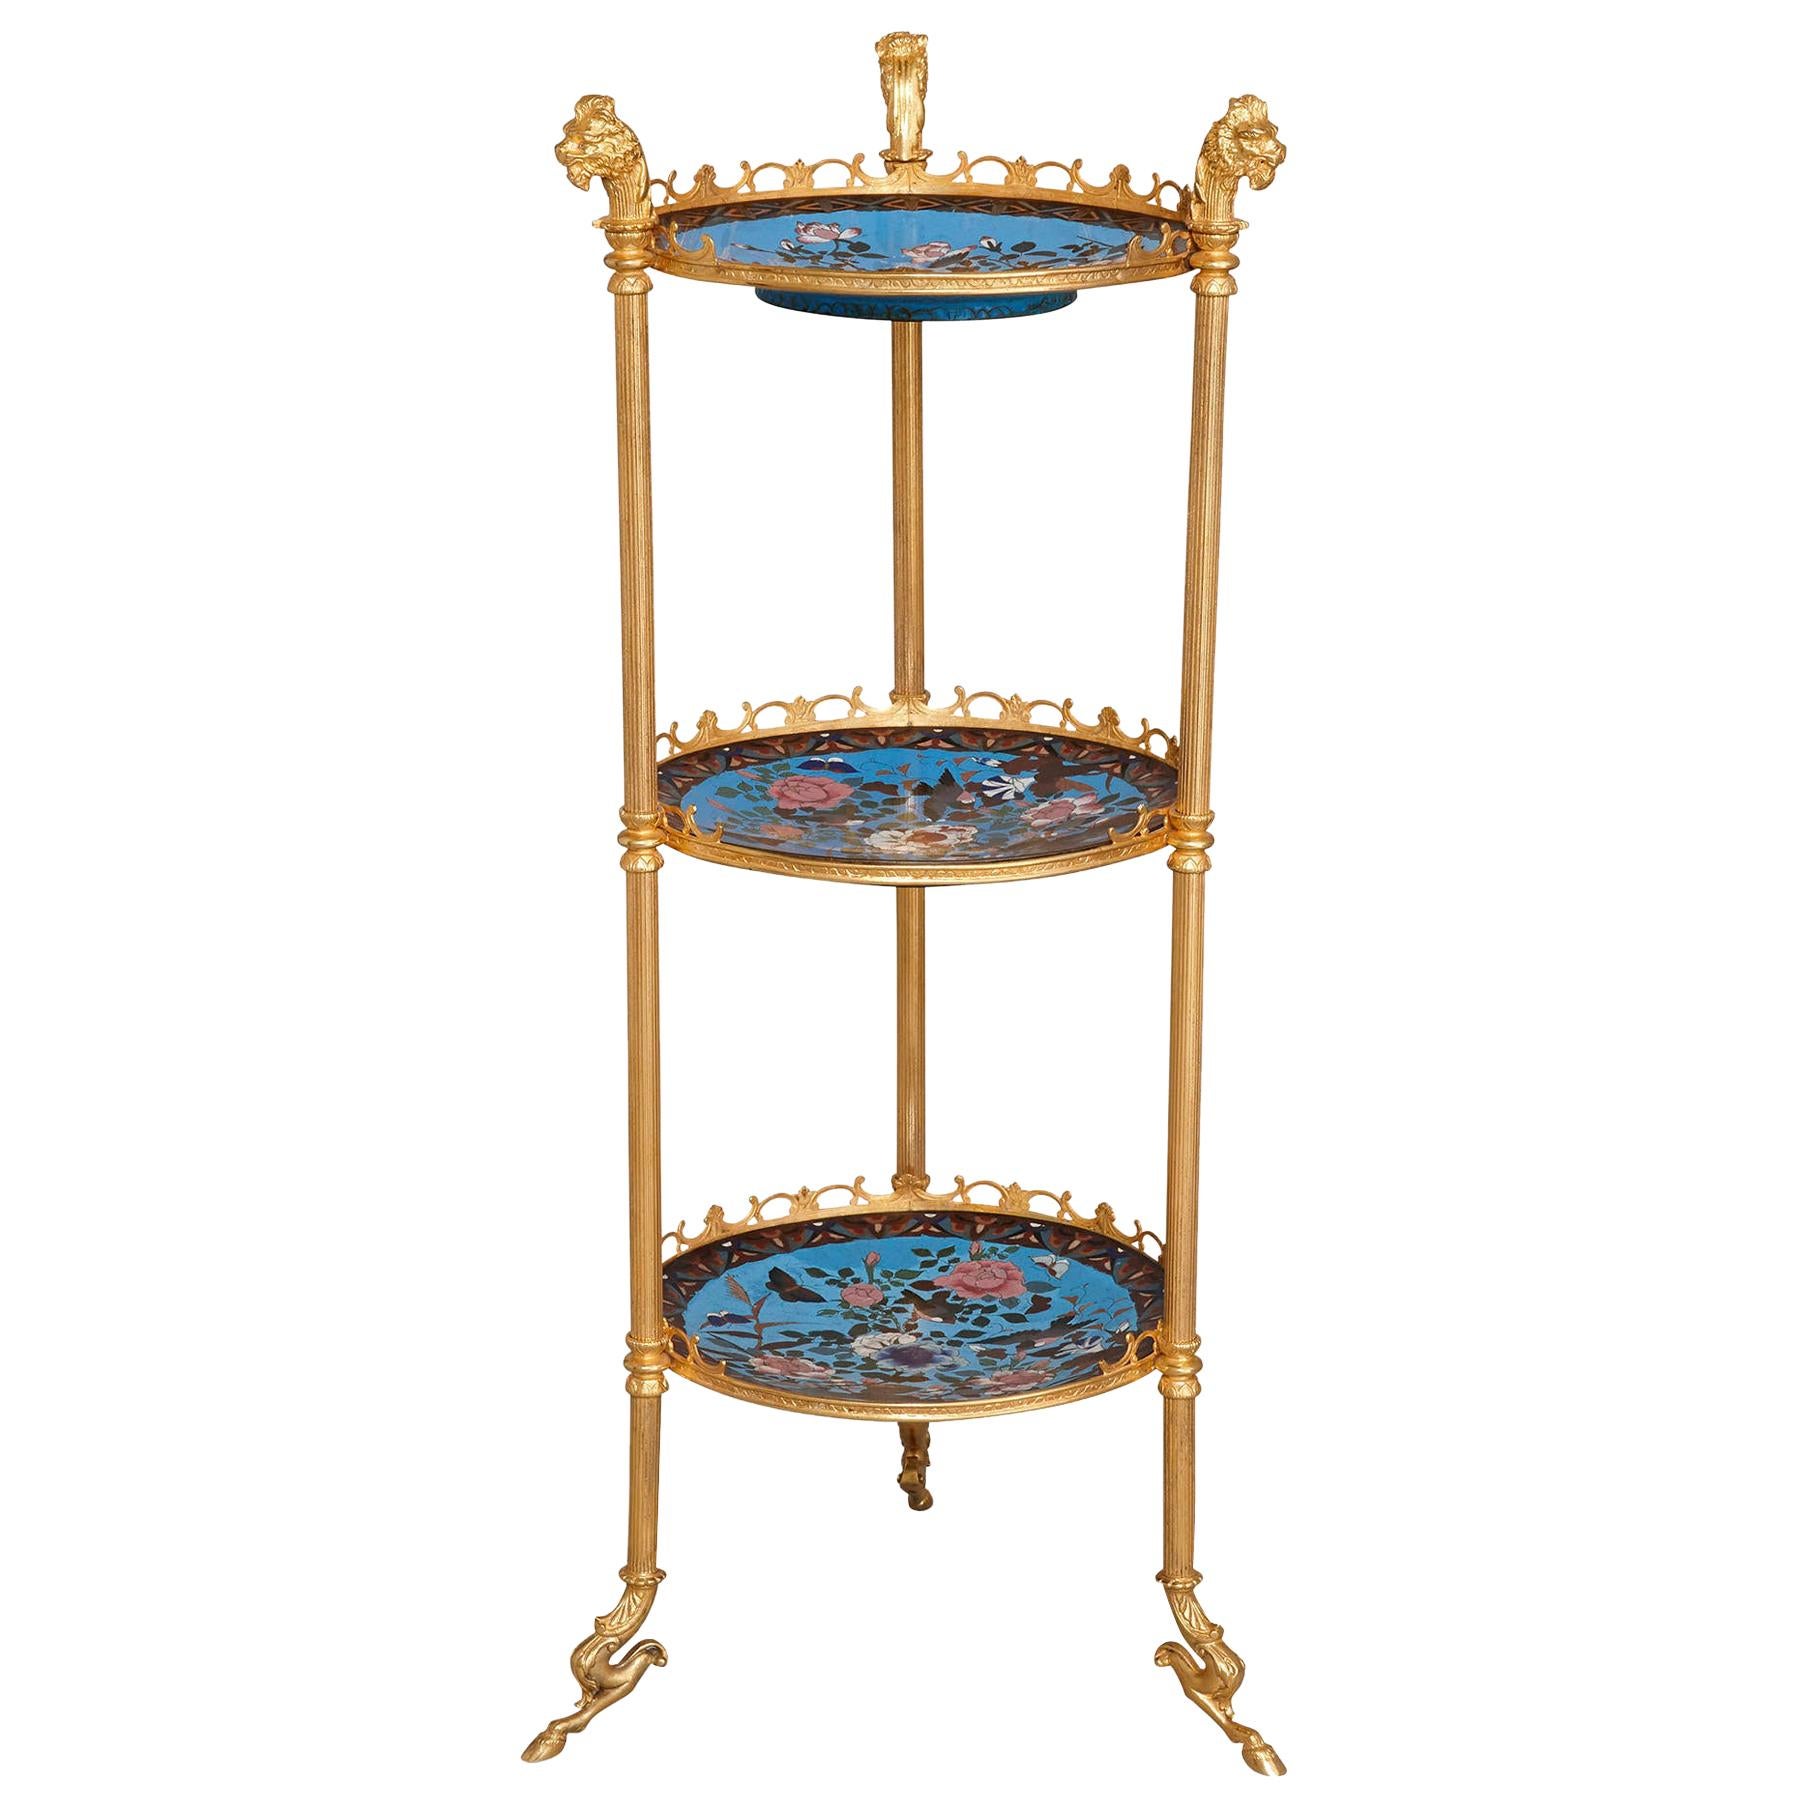 French Cloisonné Enamel and Gilt Metal Three-Shelf Tiered Table in Empire Style